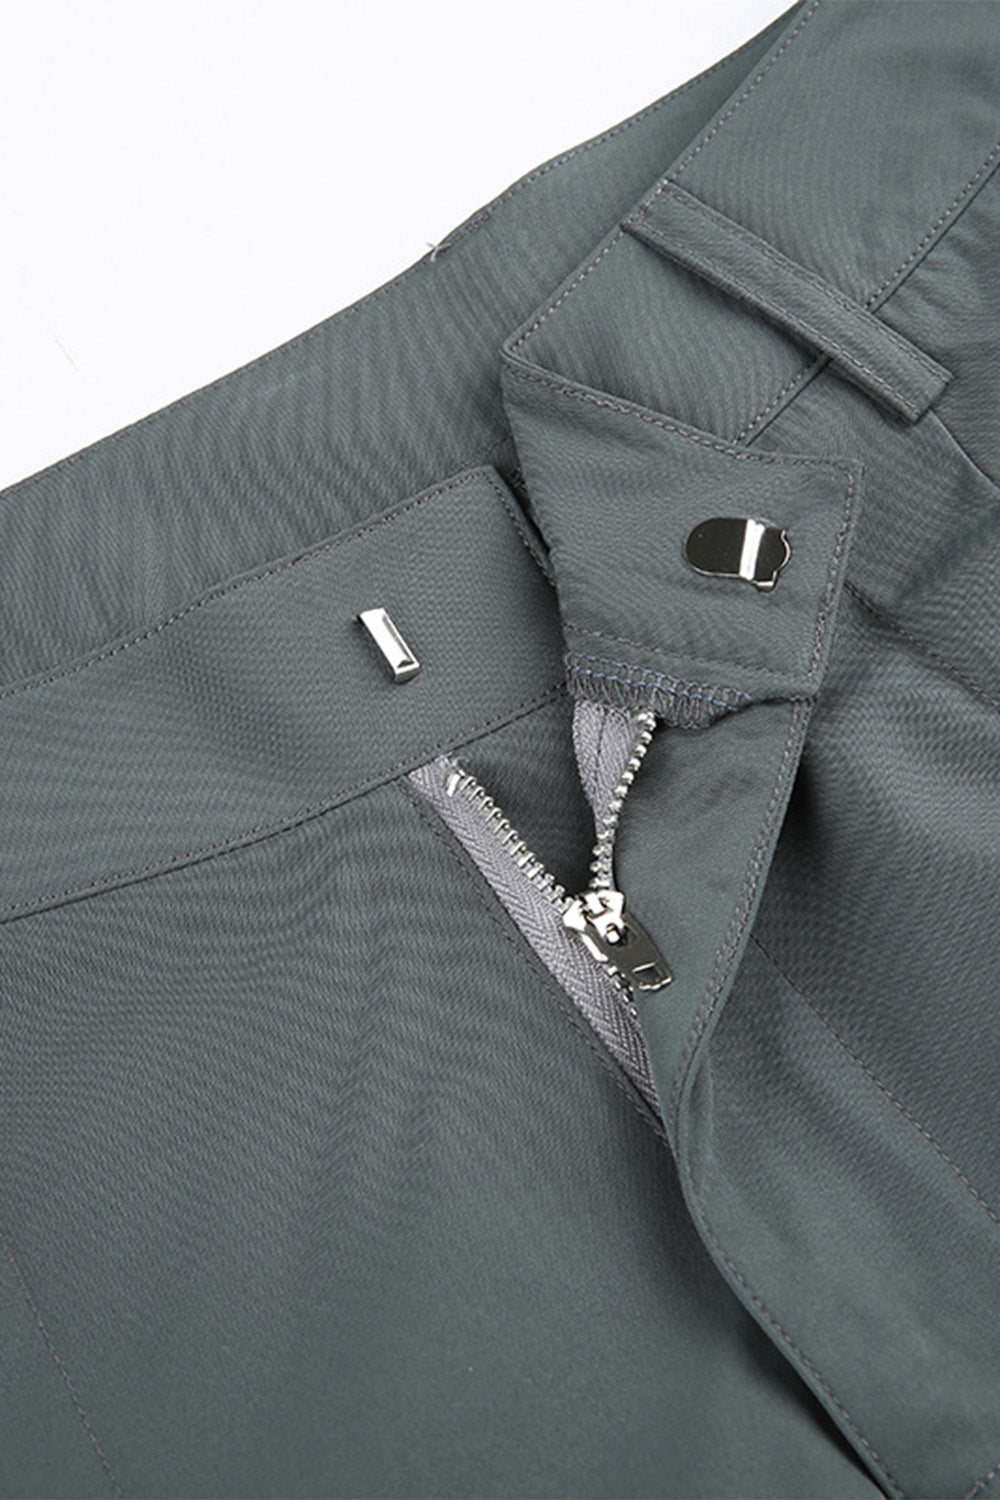 Solid Fold Large Pockets Green Cargo Pants